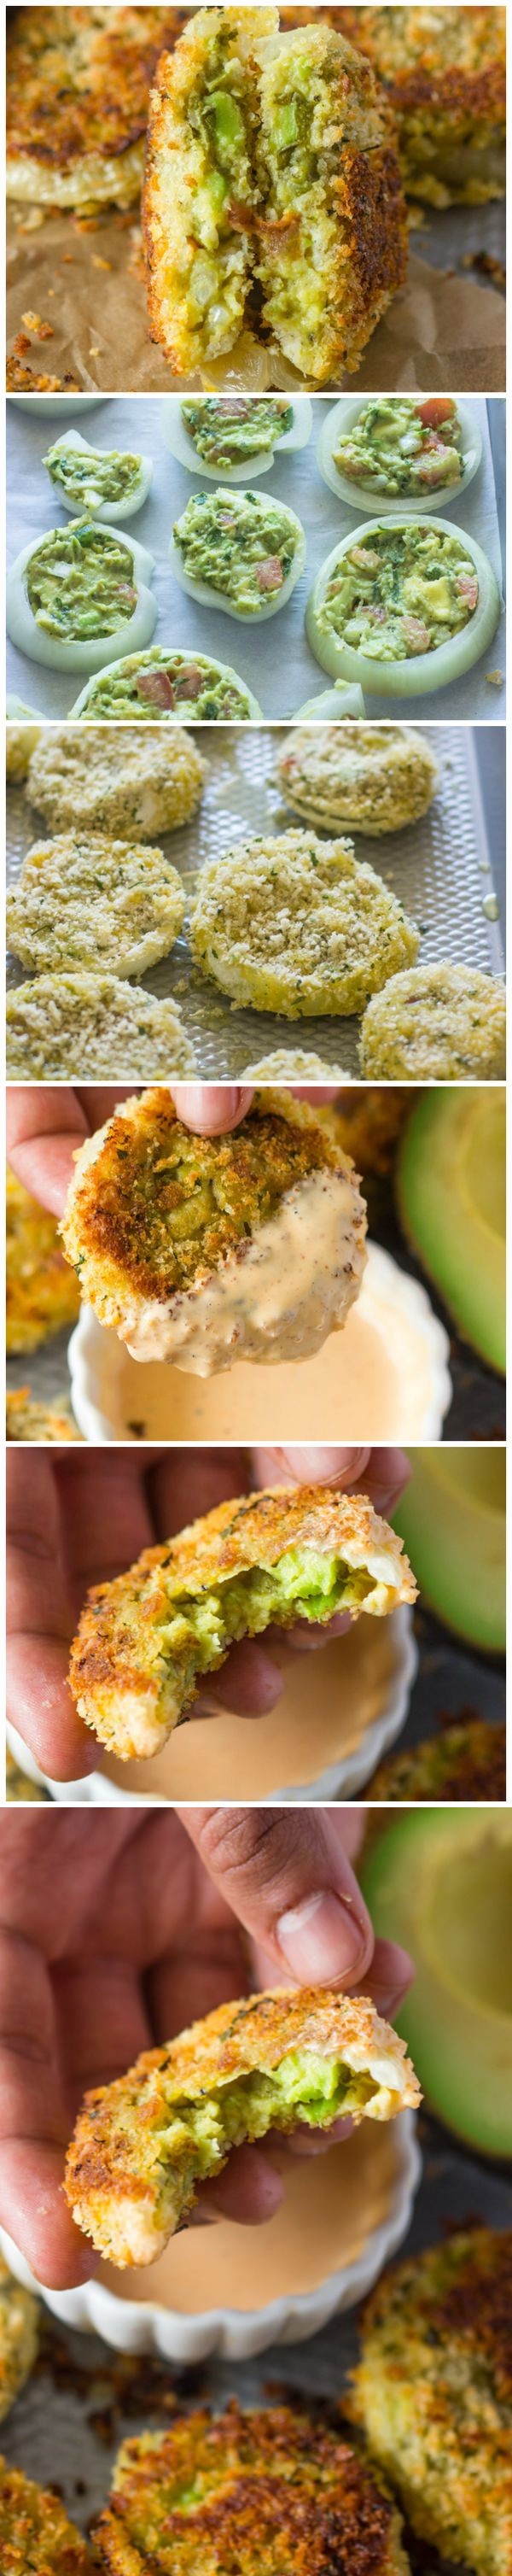 Baked Guacamole Stuffed Onion Rings with Chipotle Dipping Sauce